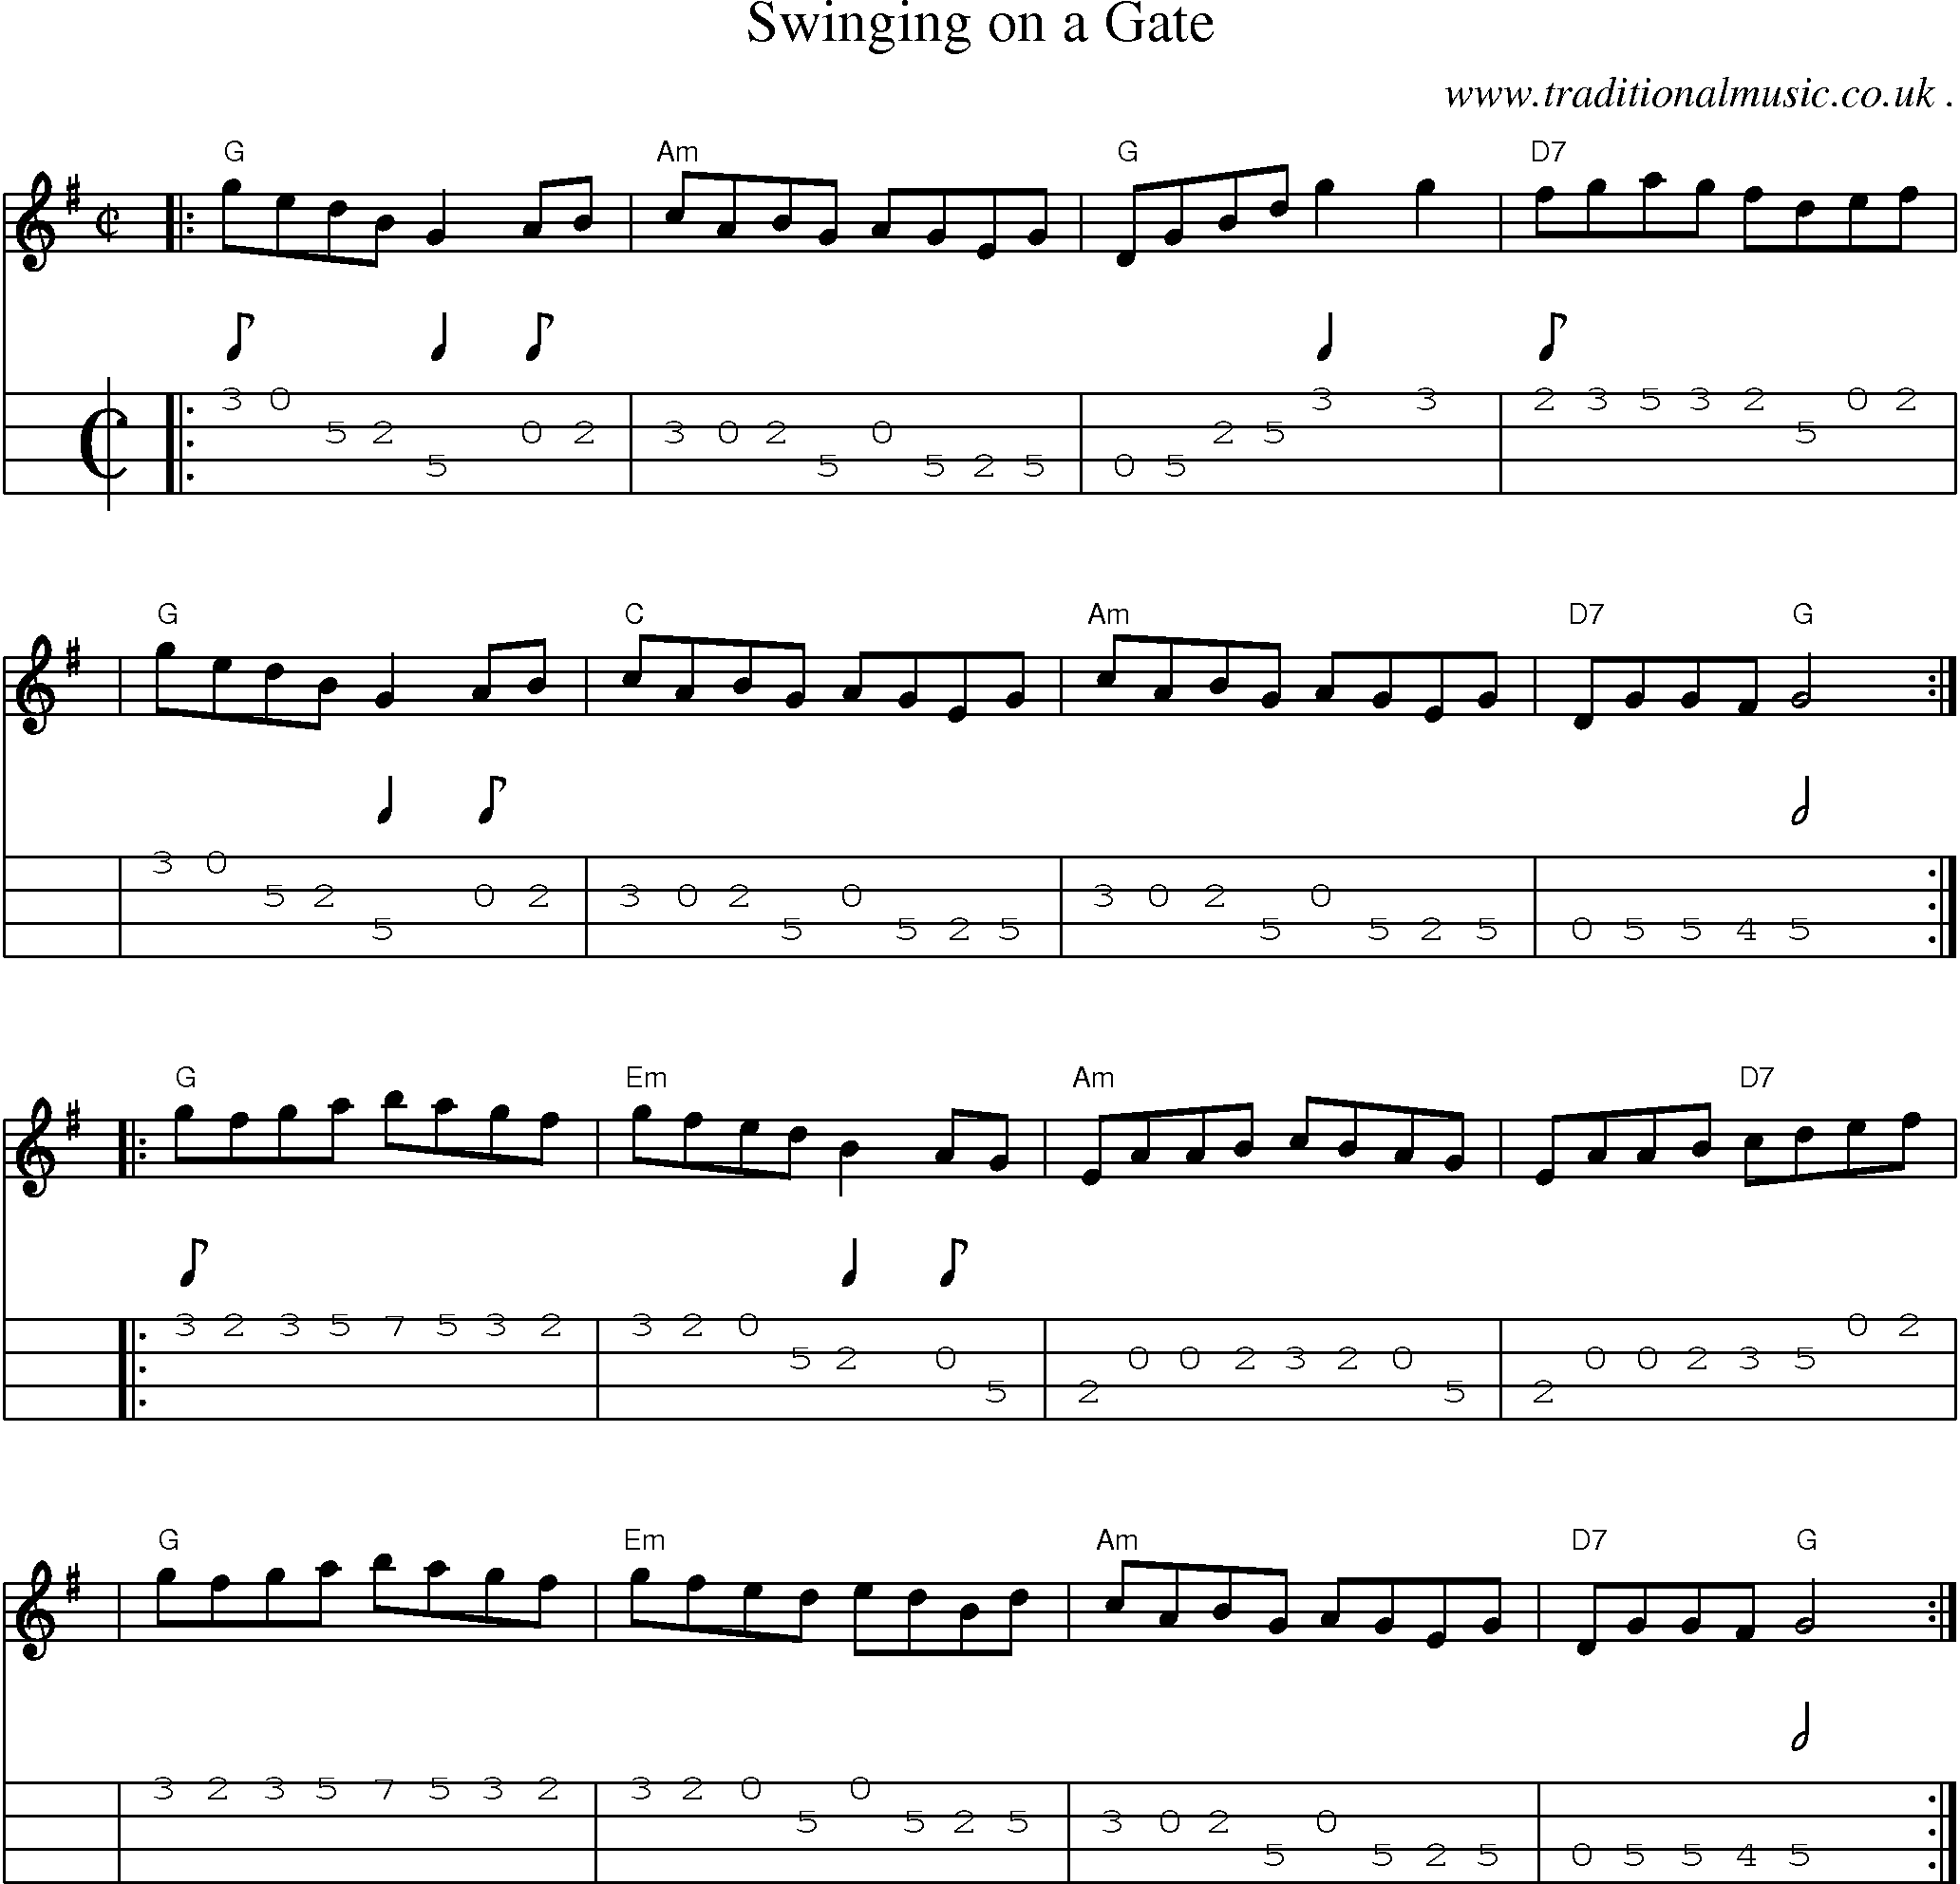 Sheet-music  score, Chords and Mandolin Tabs for Swinging On A Gate